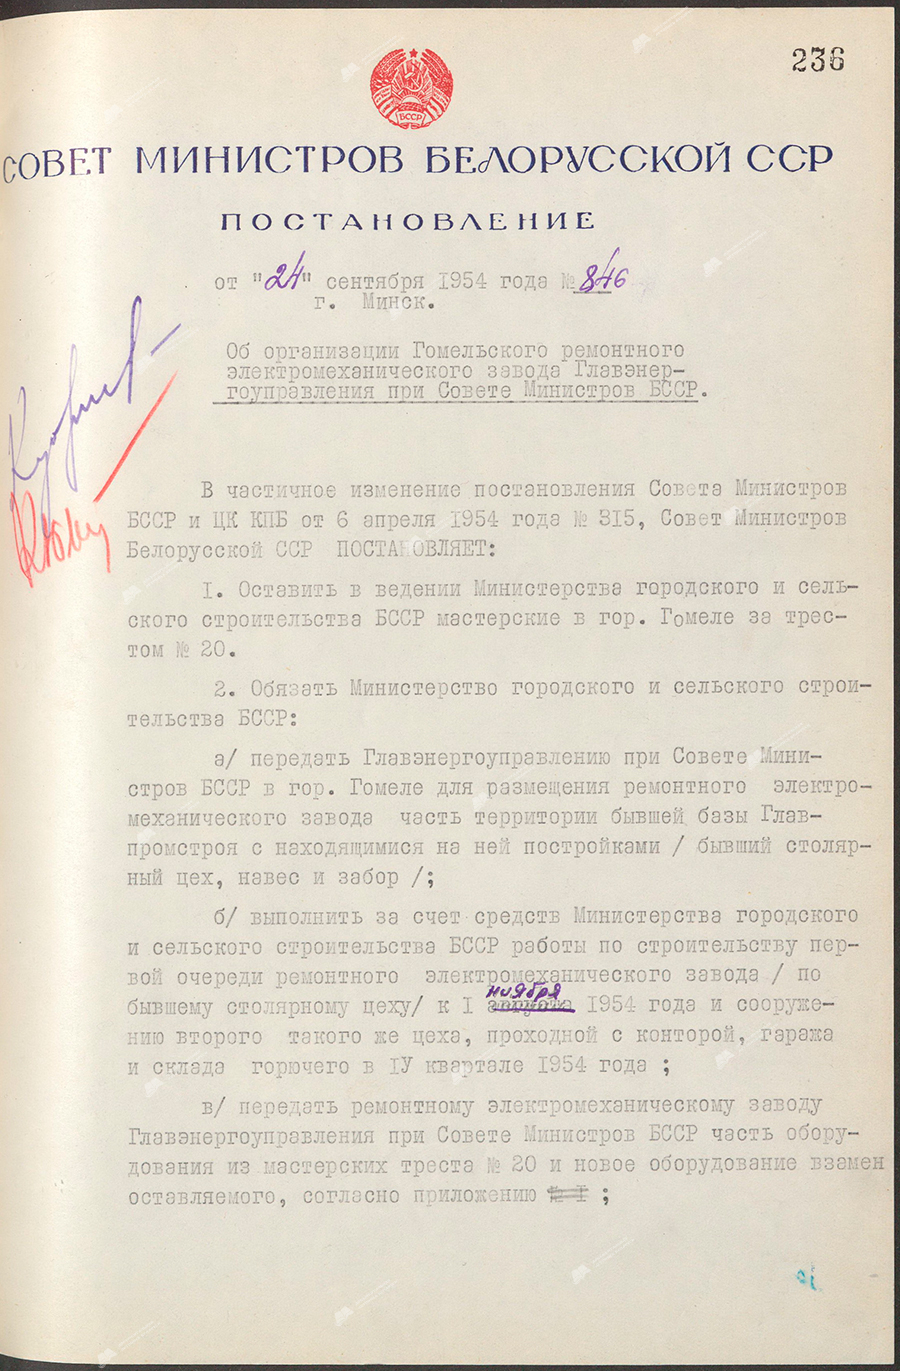 Resolution No. 846 of the Council of Ministers of the Byelorussian SSR «On the organization of the Gomel Electromechanical Repair Plant of the Main Energy Administration under the Council of Ministers of the BSSR»-стр. 0